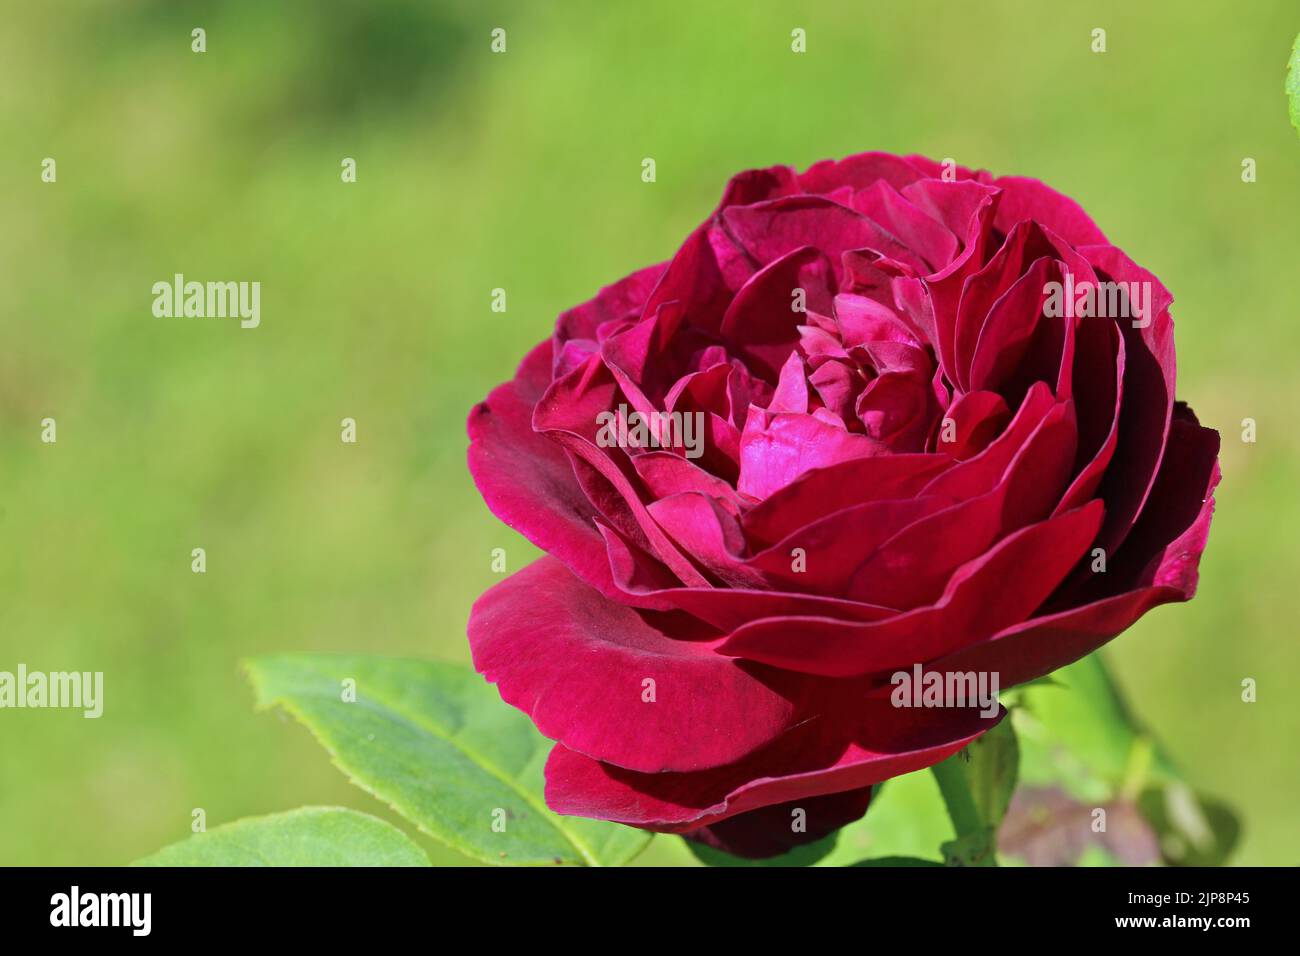 Red old climbing rose, Rosa variety Souvenir du Docteur Jamain, flower in close up with a background of blurred leaves. Stock Photo